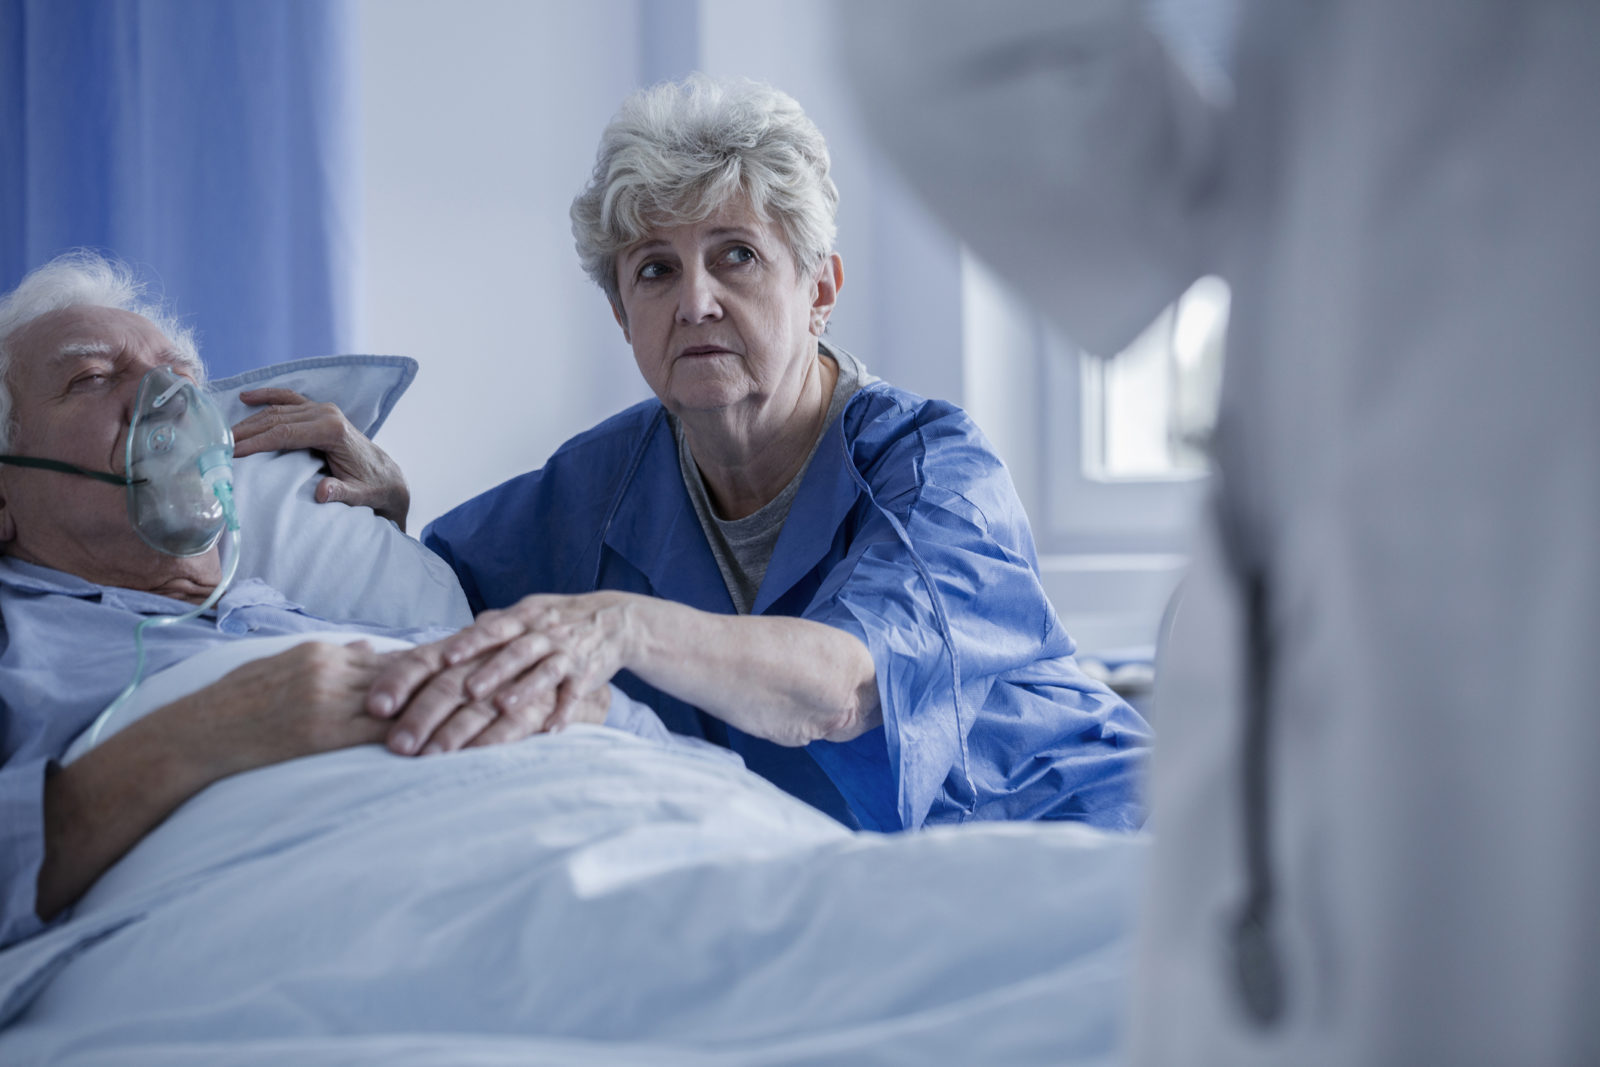 elderly man in hospital with wife by his side talking to doctor